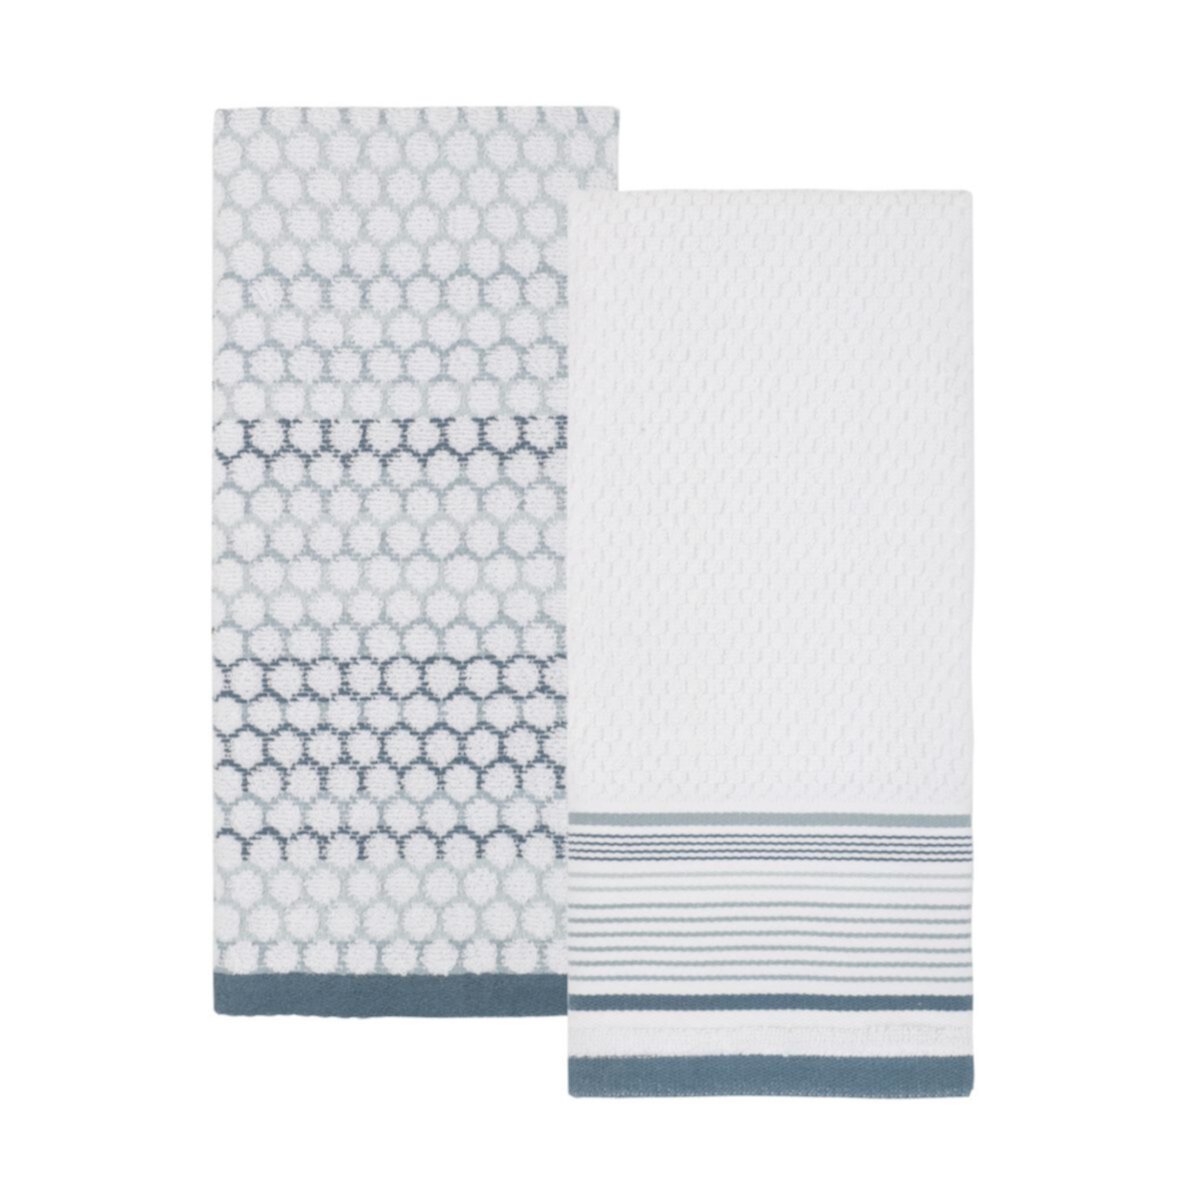 The Big One® Blue & White Textured 2-Pack Hand Towels The Big One